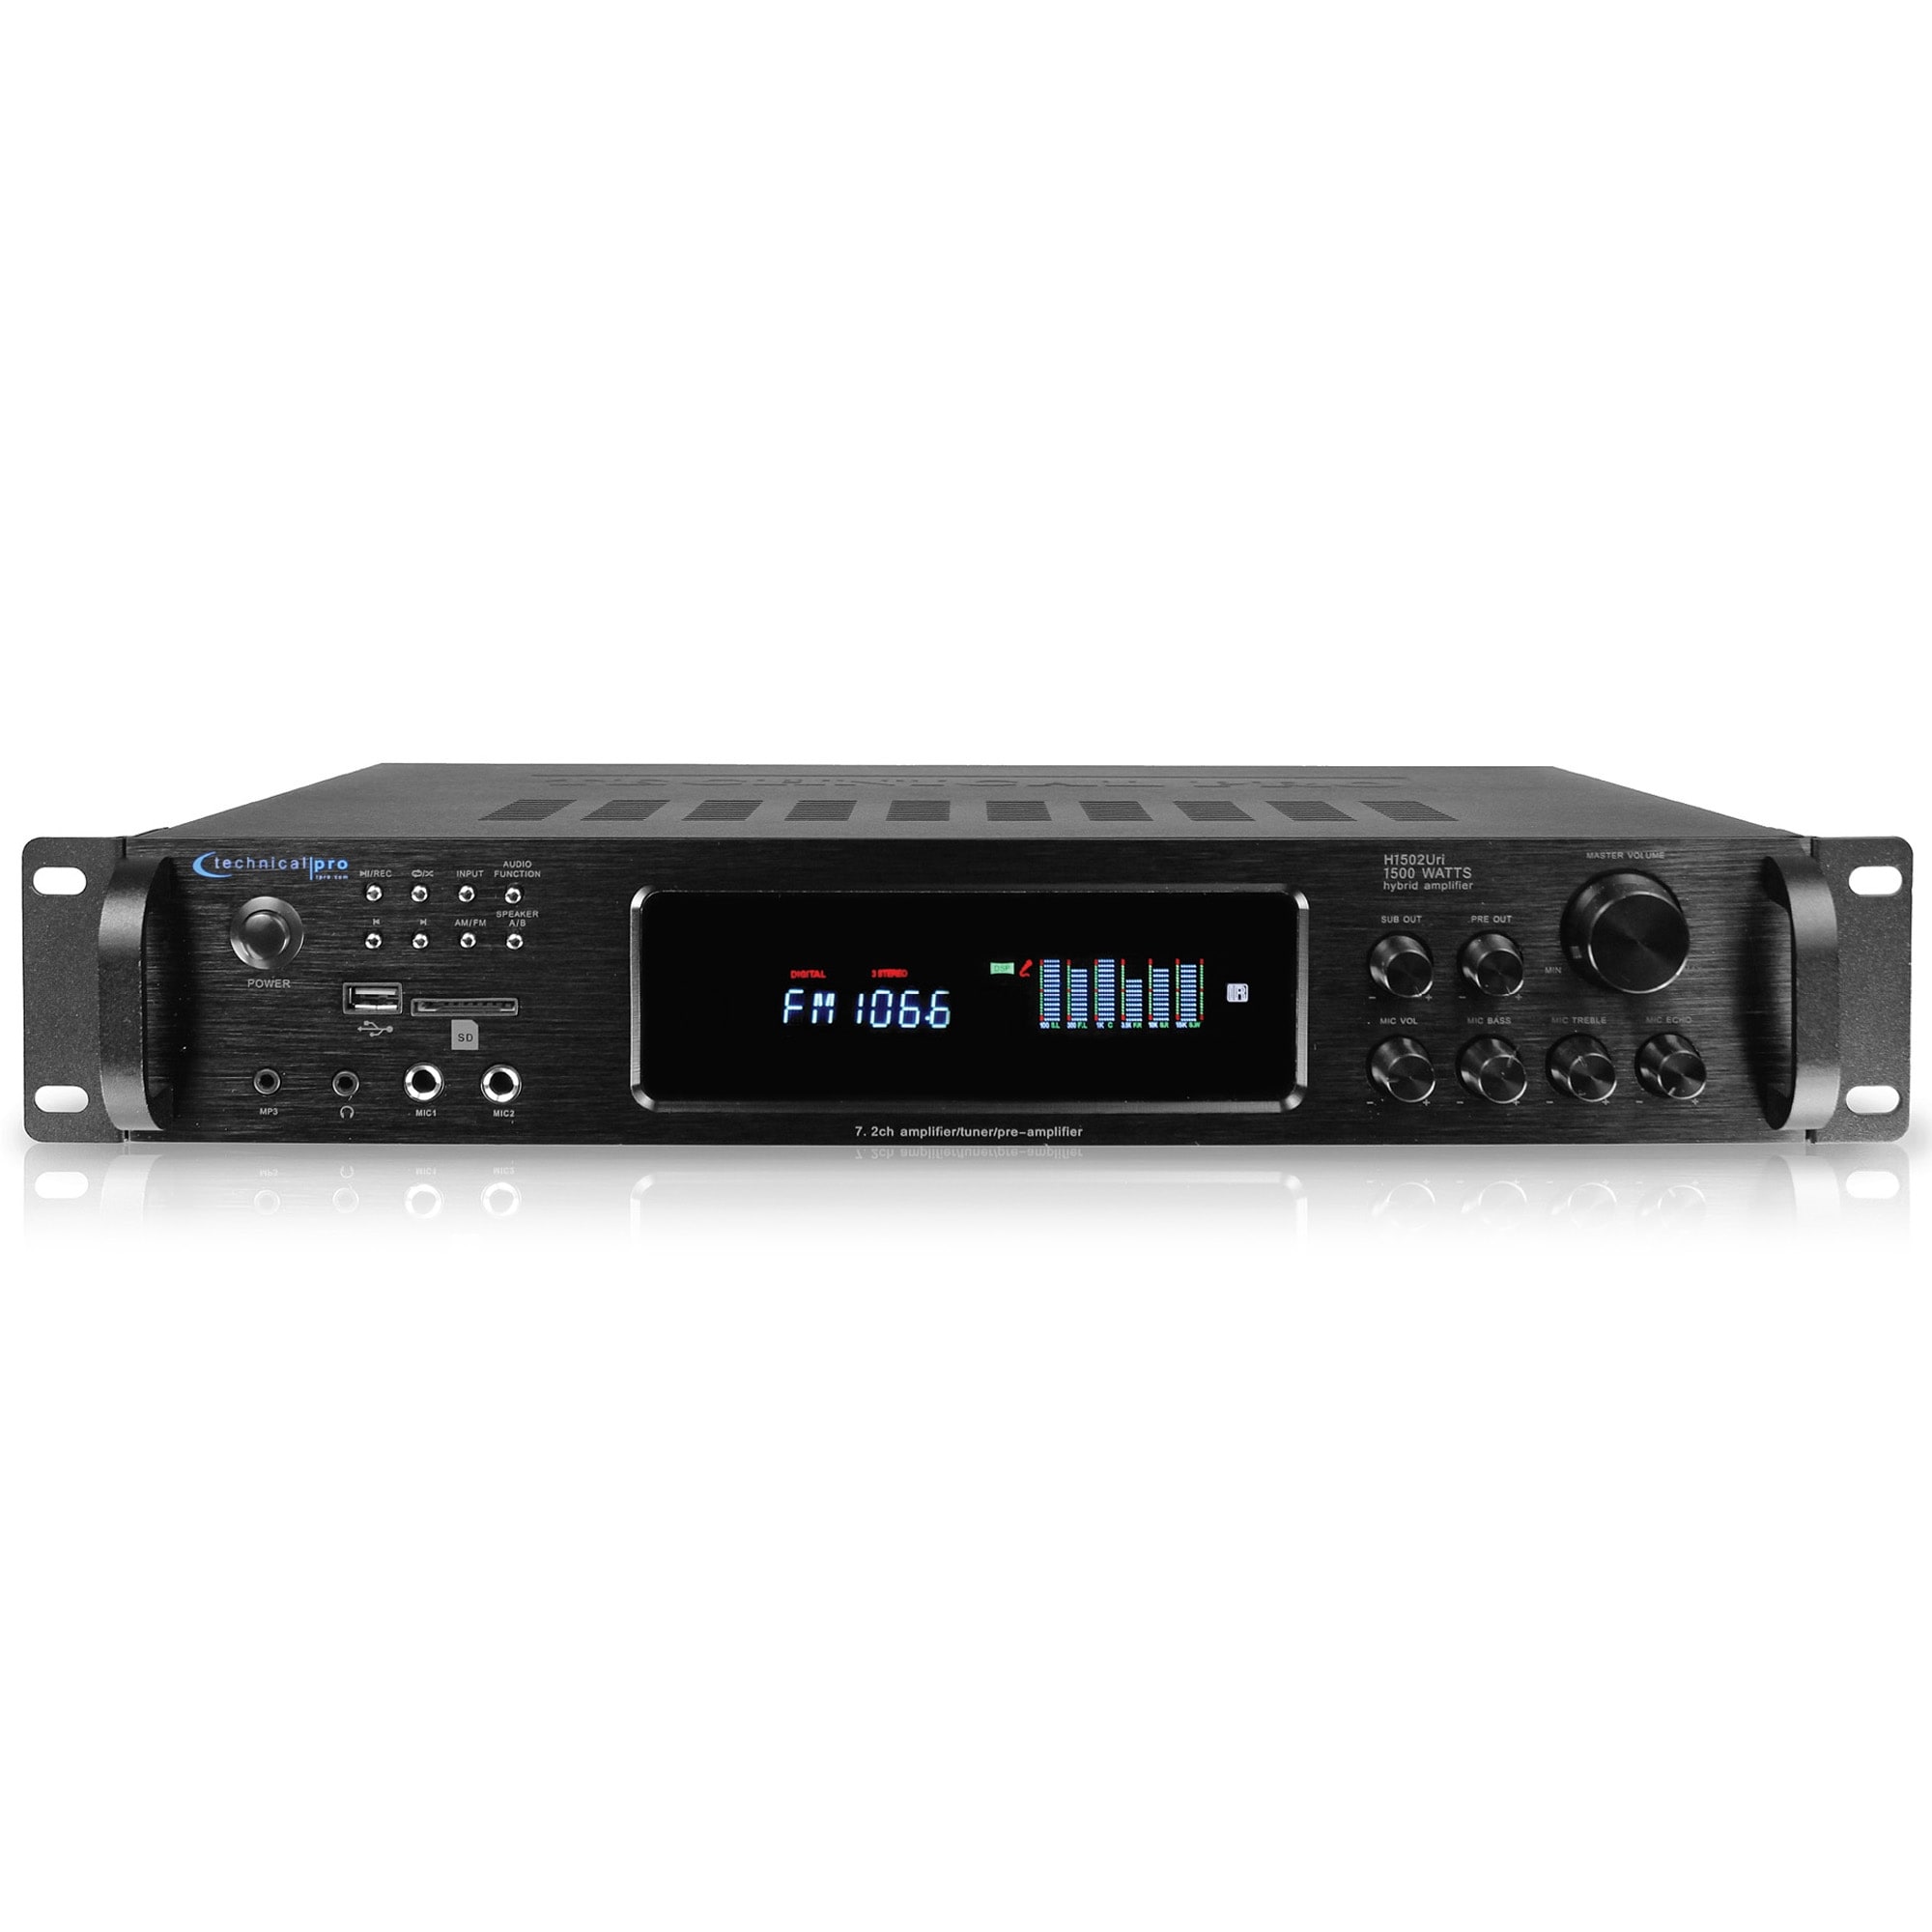 Technical Pro 1500W Hybrid Multi Channel Bluetooth Home Stereo Amplifier w/ USB/SD, Mic Inputs, AM/FM tuner, Wireless Remote